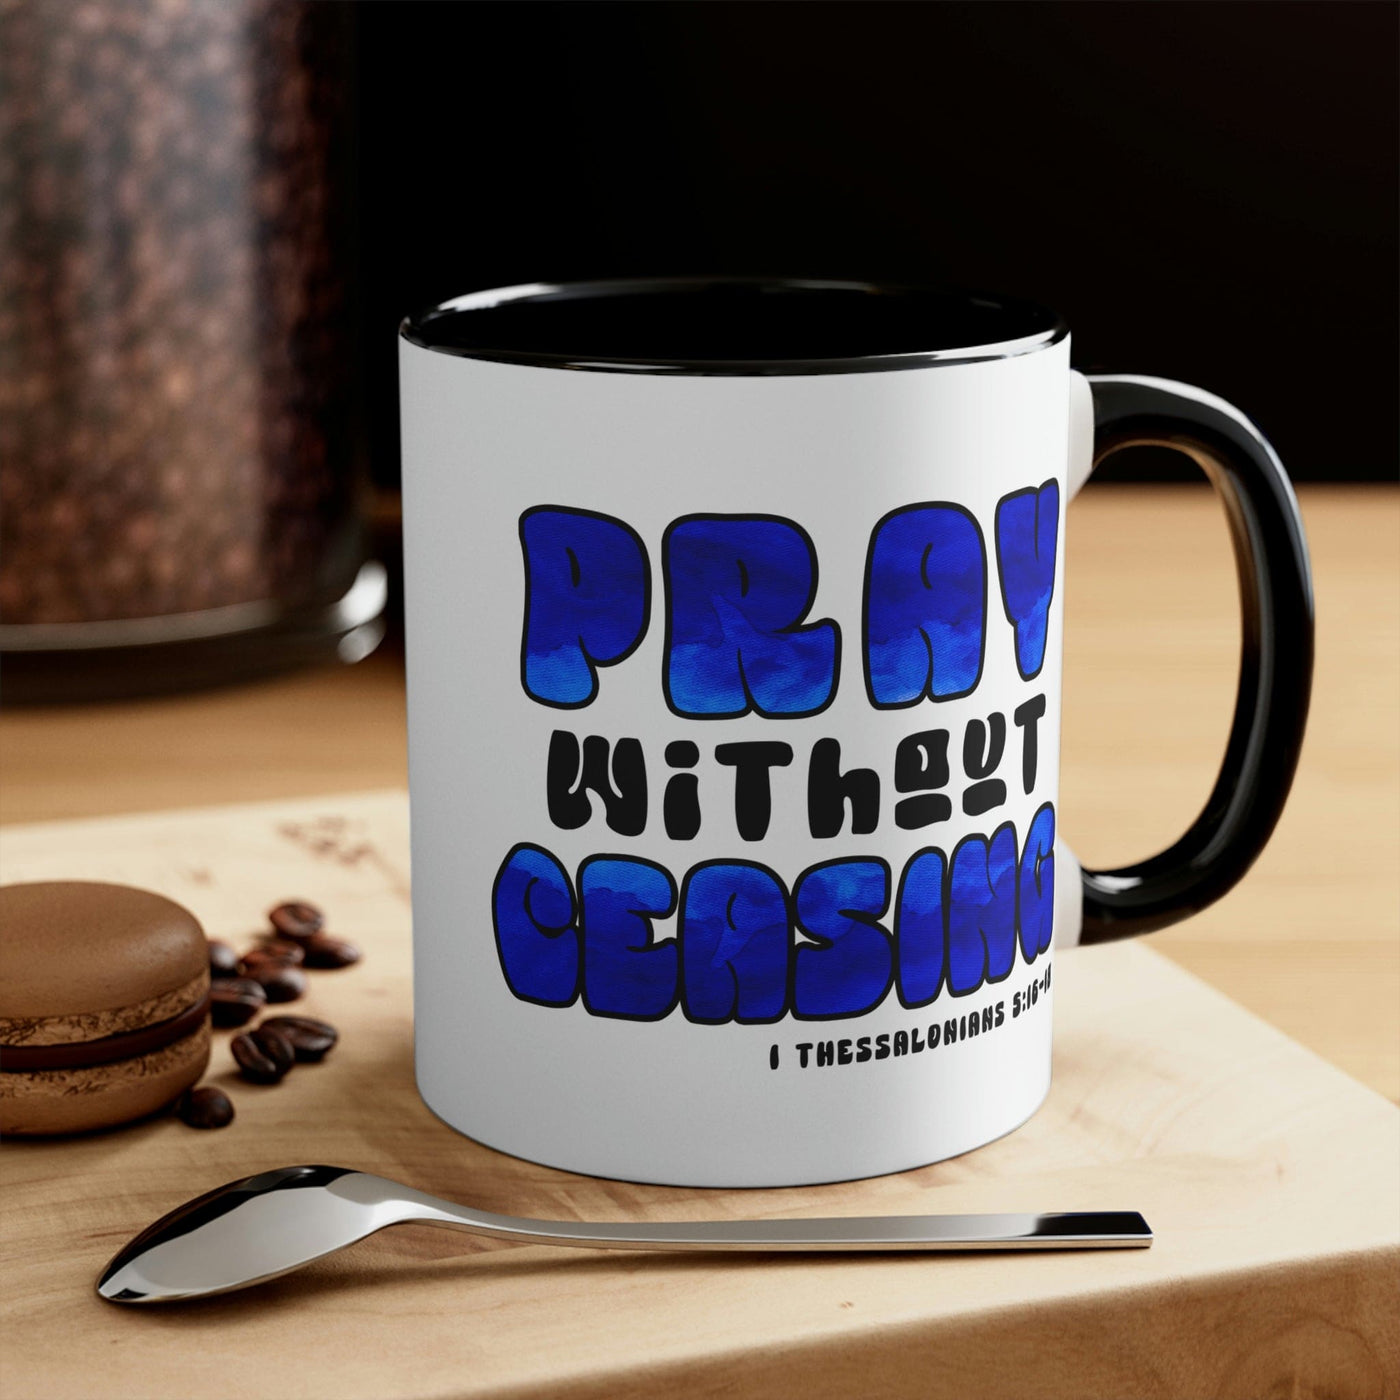 Two-tone Accent Ceramic Mug 11oz Pray Without Ceasing Blue And White Christian